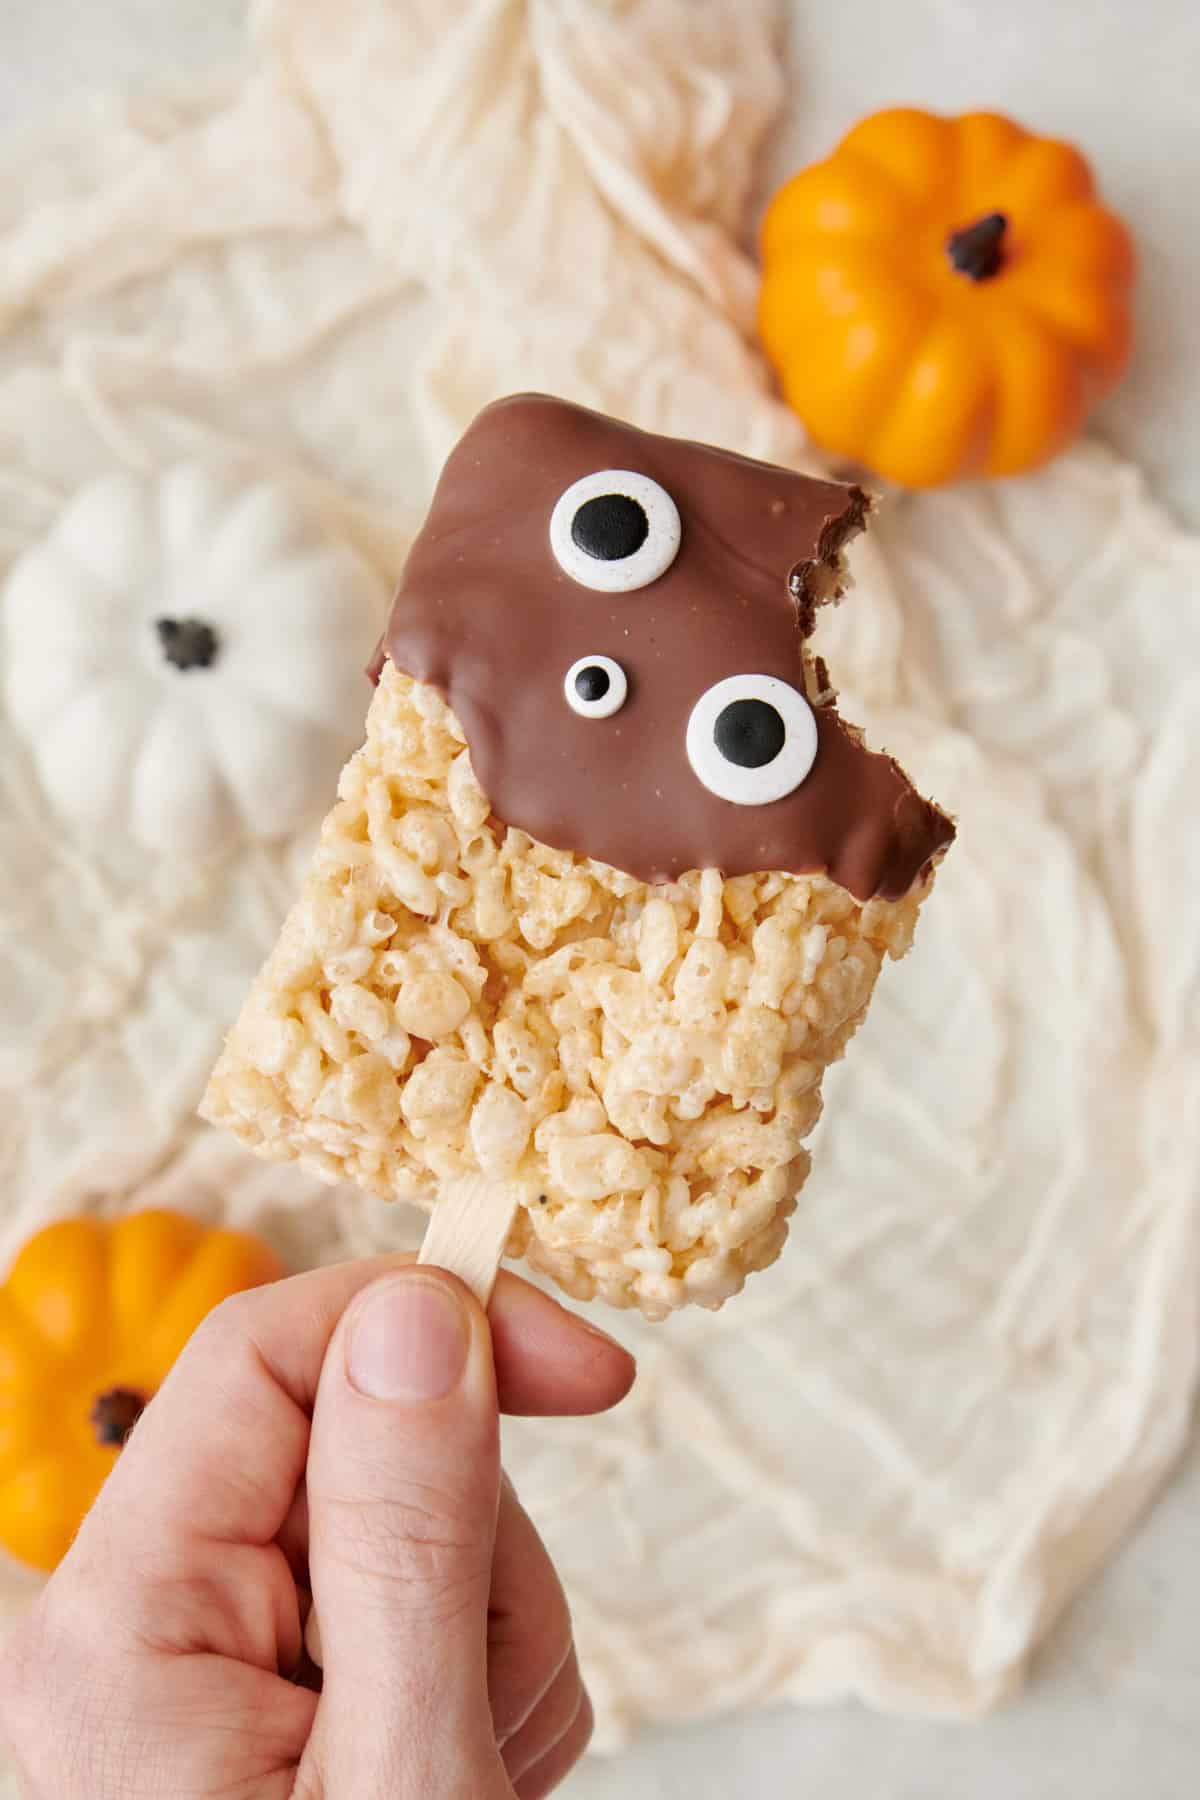 Chocolate dipped rice krispies with halloween decoration and a bite taken out.